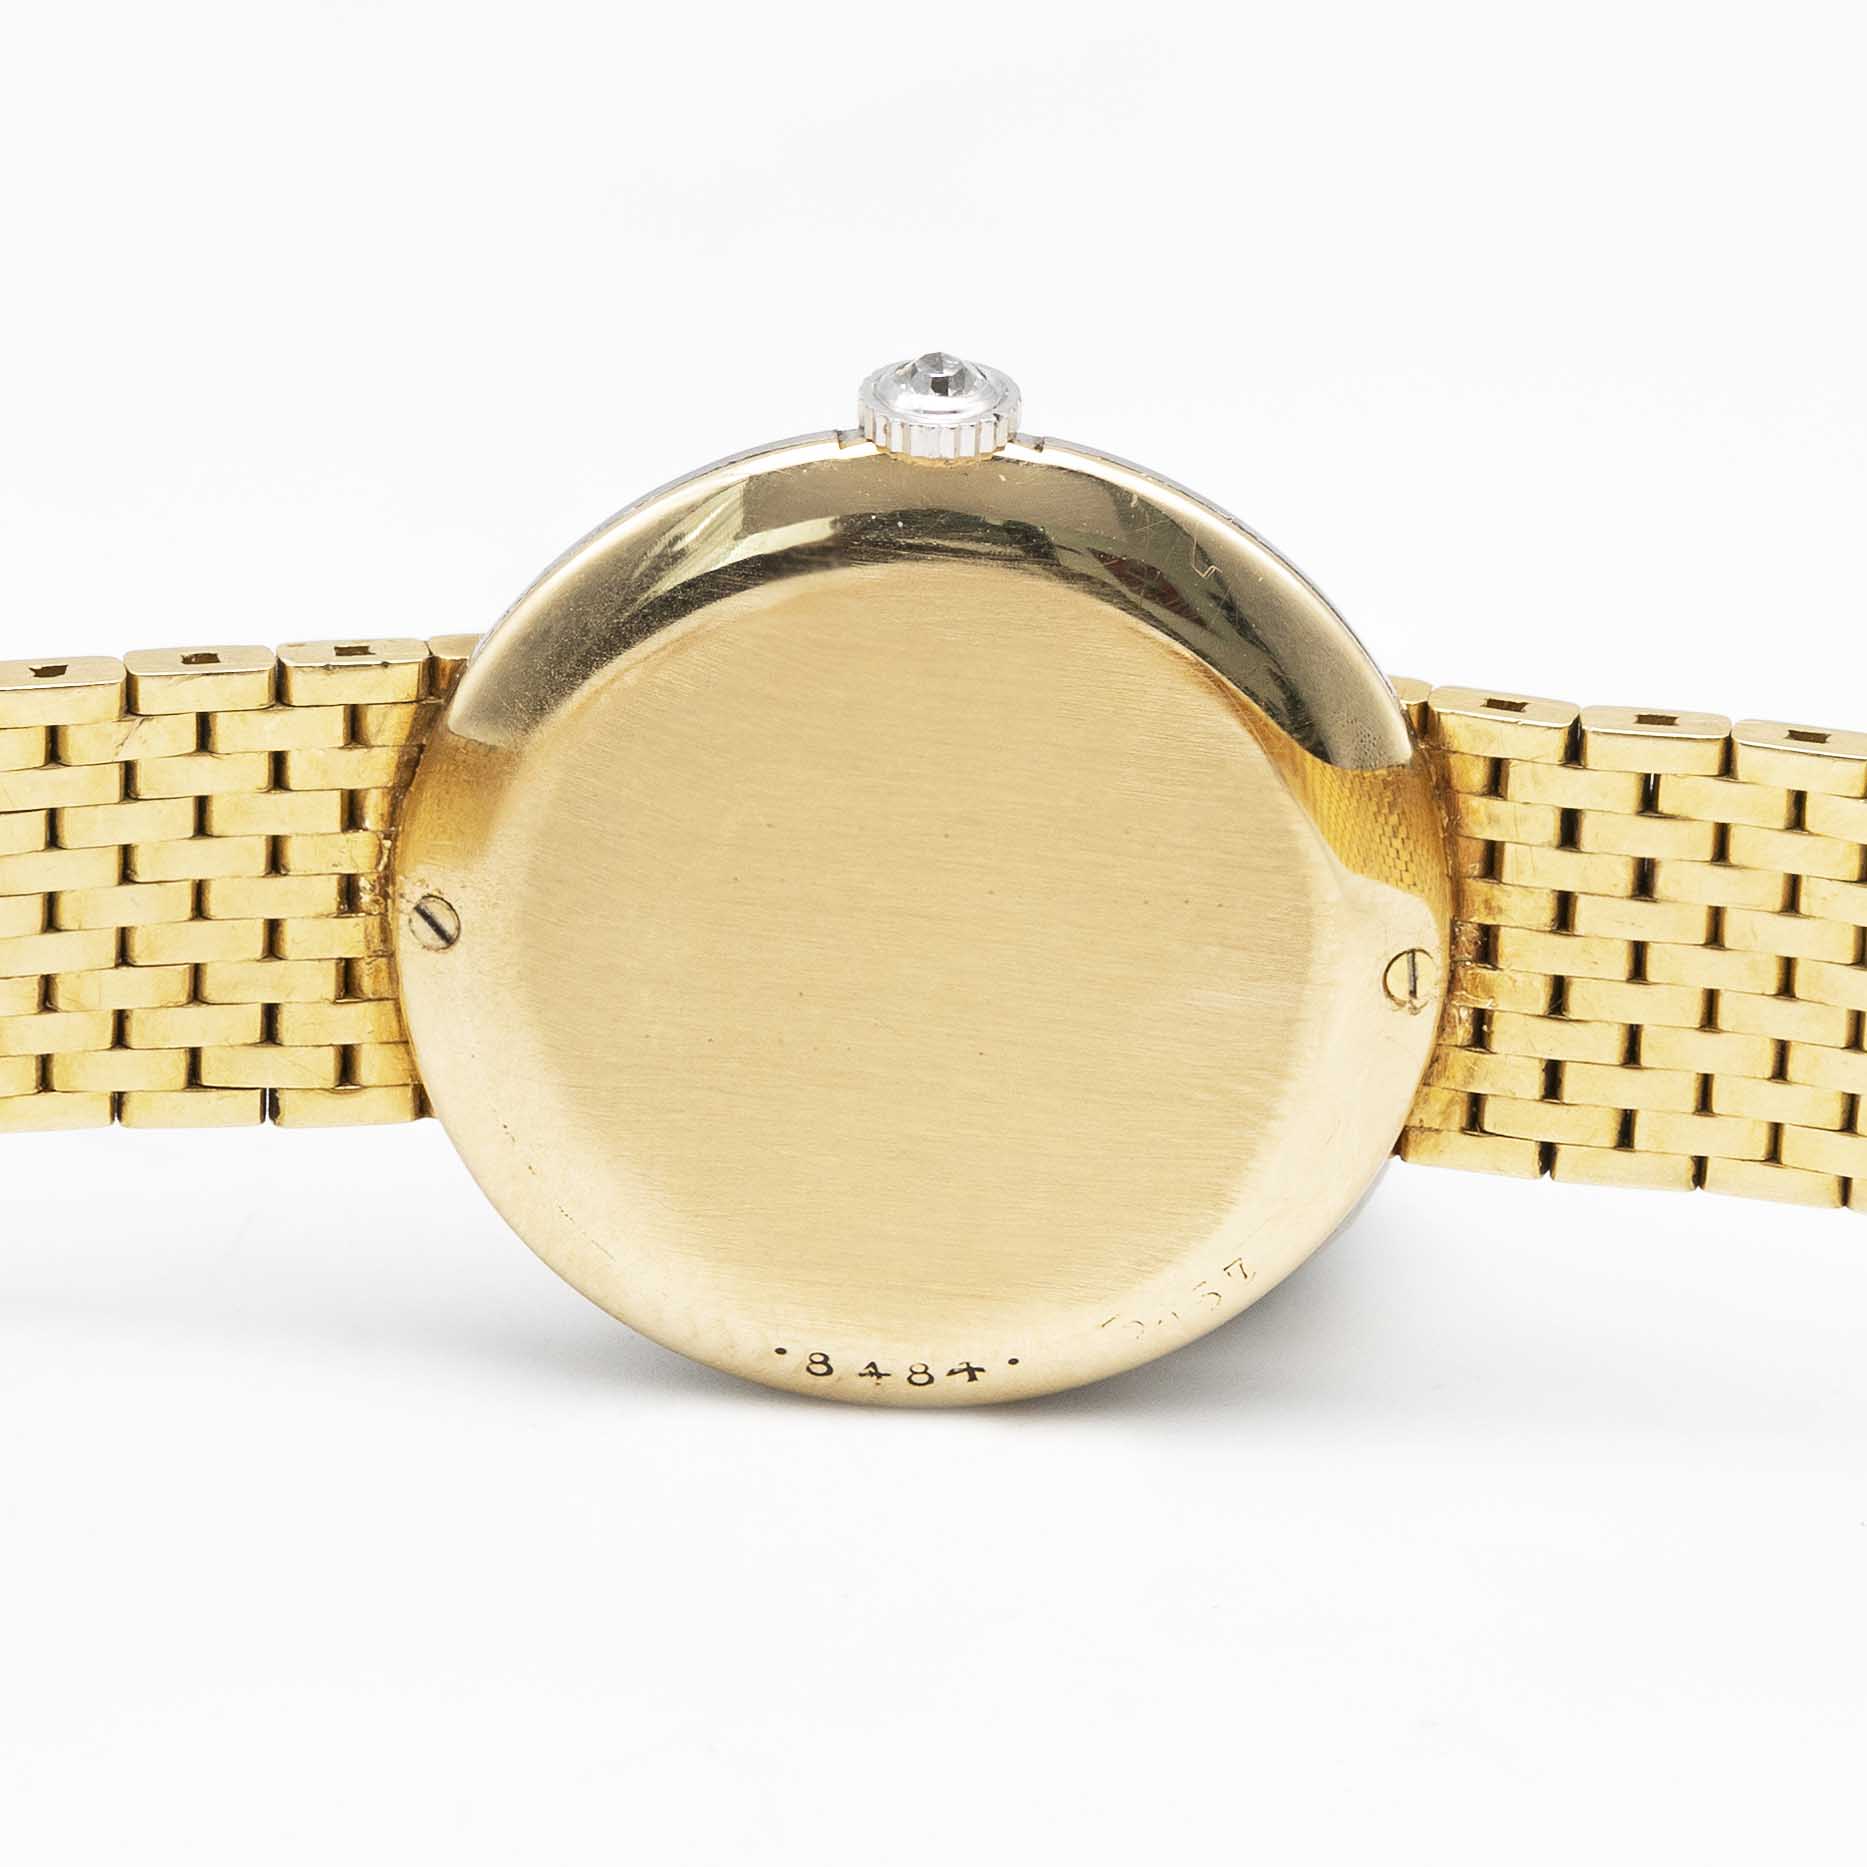 A FINE & RARE LADIES 18K SOLID GOLD & DIAMOND CARTIER LONDON BRACELET WATCH CIRCA 1957, WITH - Image 8 of 13